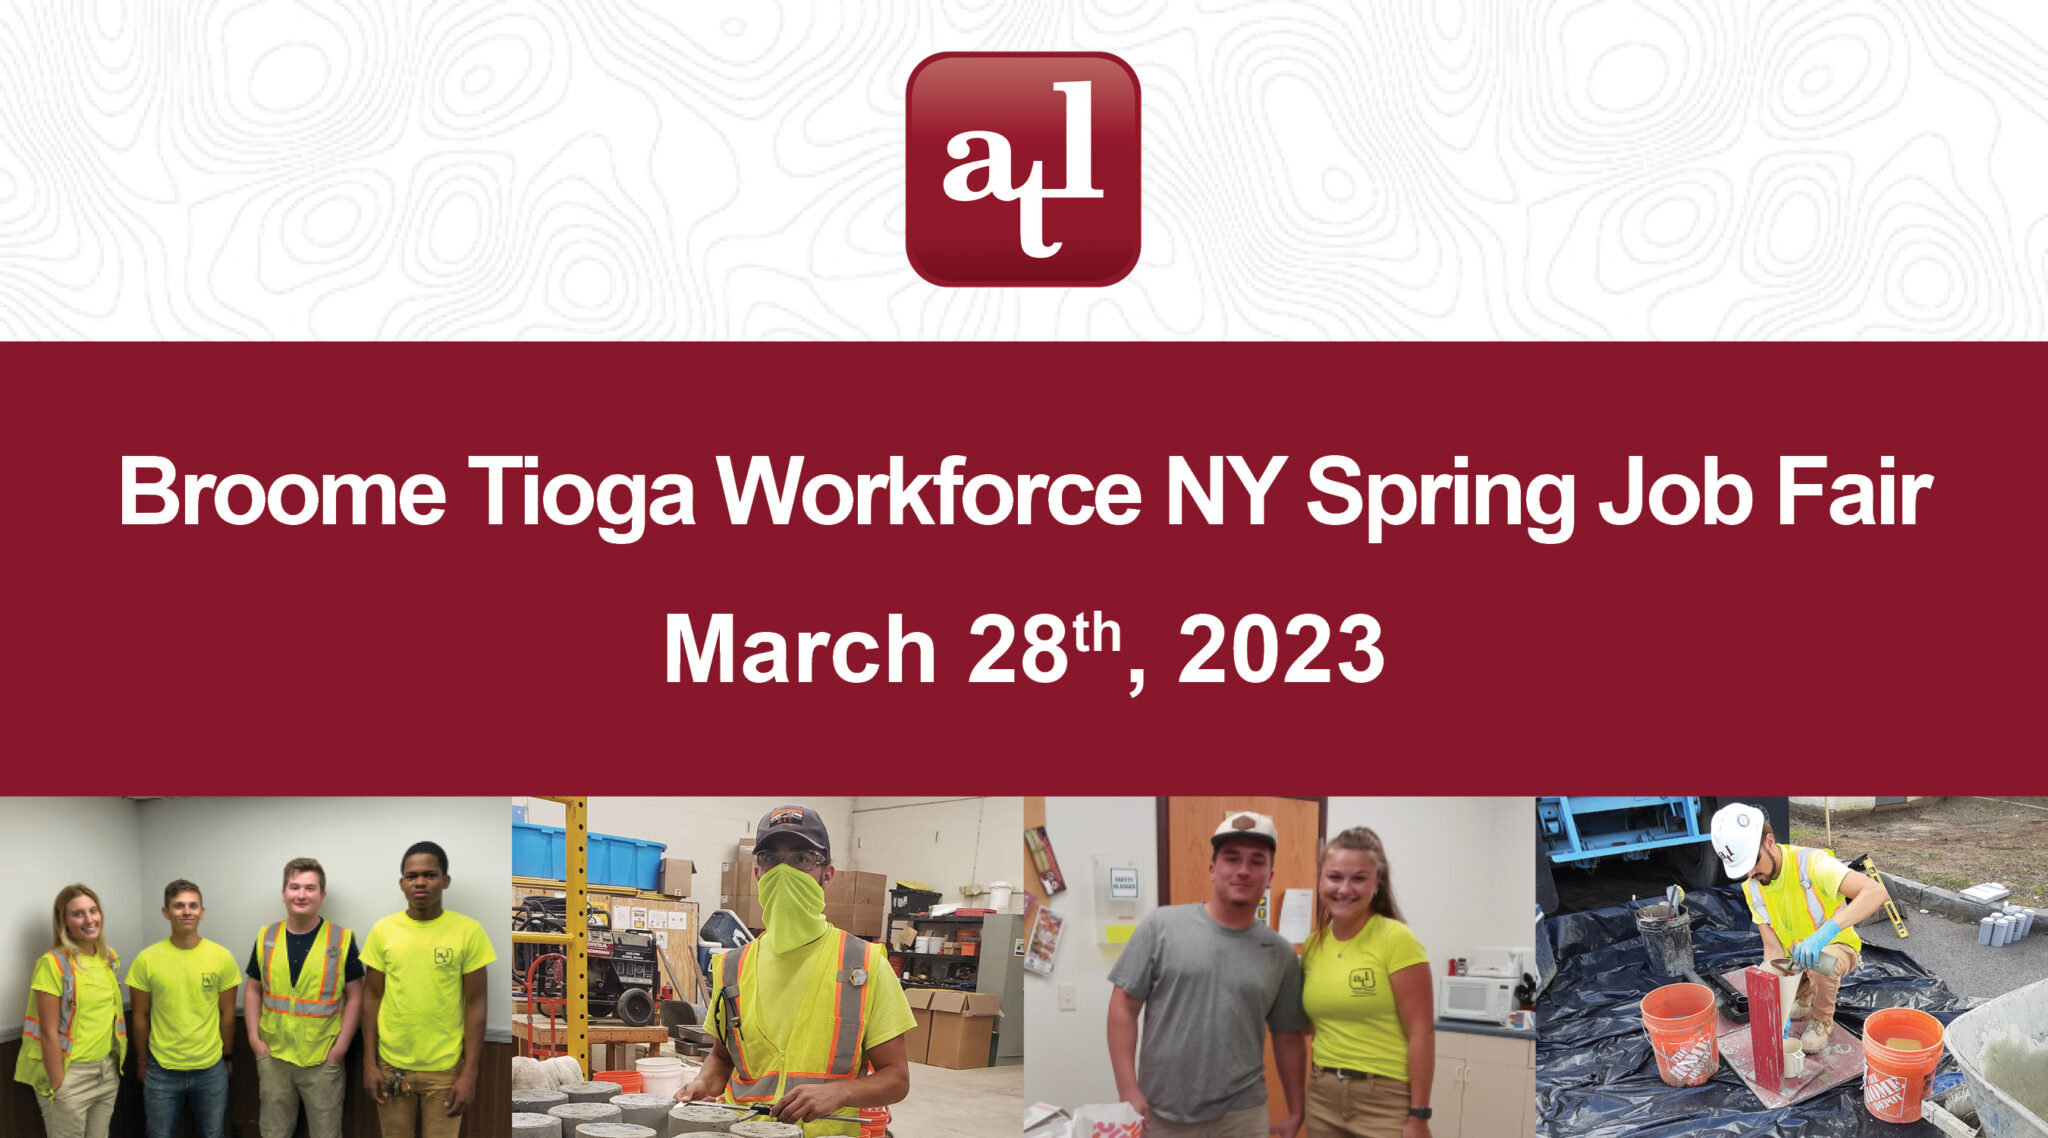 ATL is Attending the Broome Tioga Workforce NY Spring Job Fair March